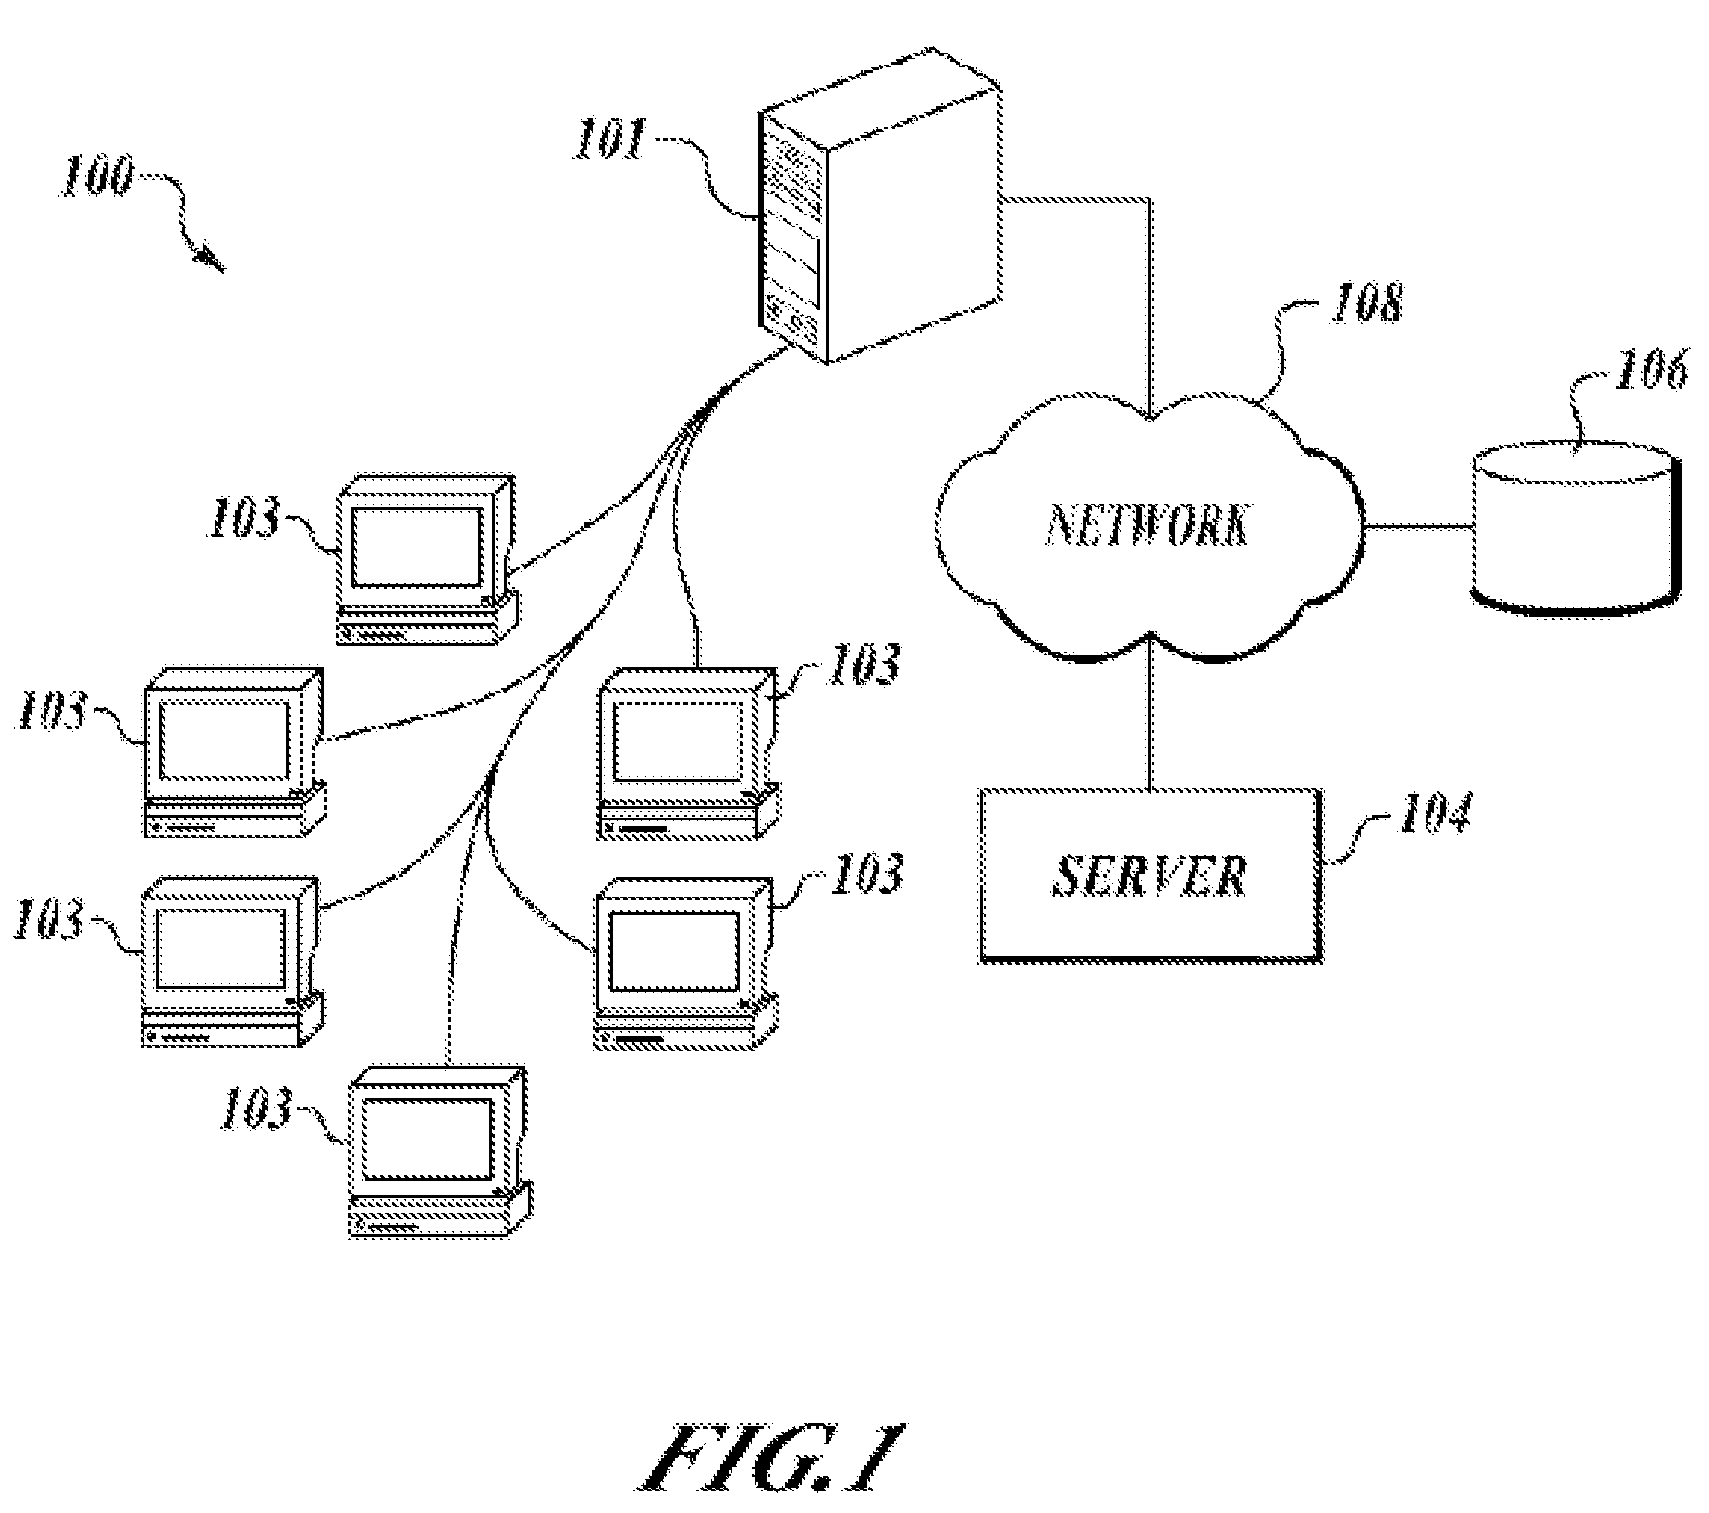 Methods and systems for detection of anomalies in digital data streams